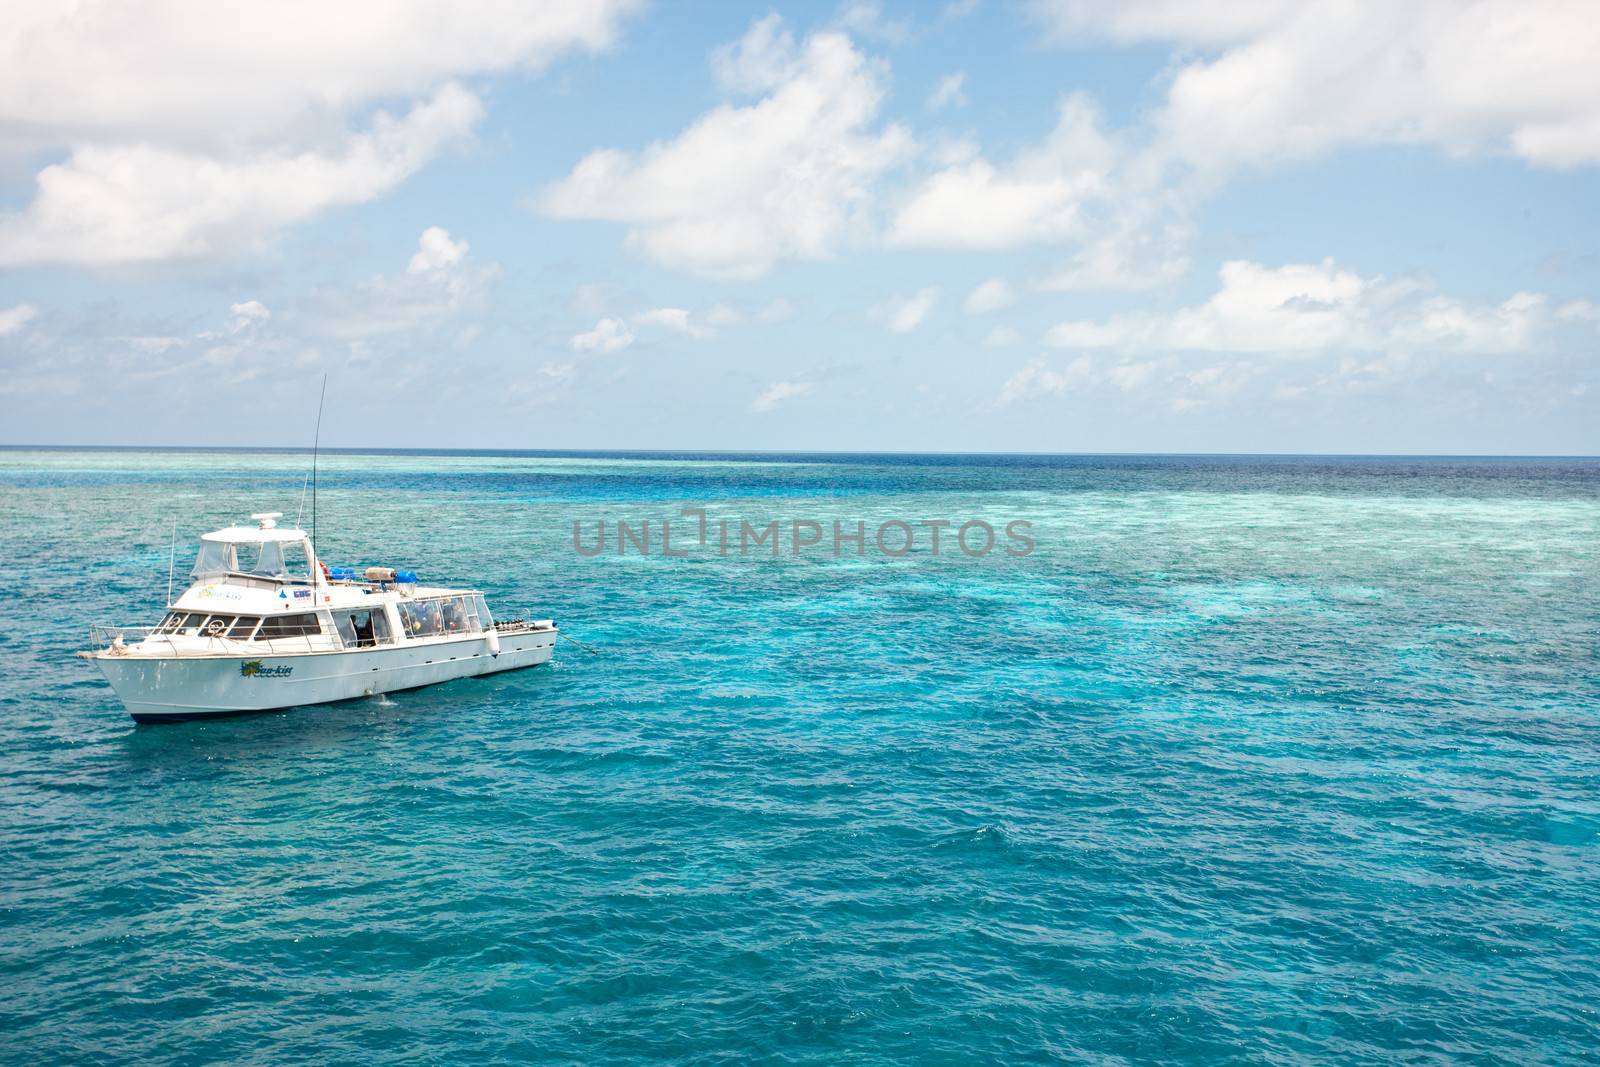 Dive boat stationed off the Great Barrier Reef in Queensland, Australia in a calm blue ocean